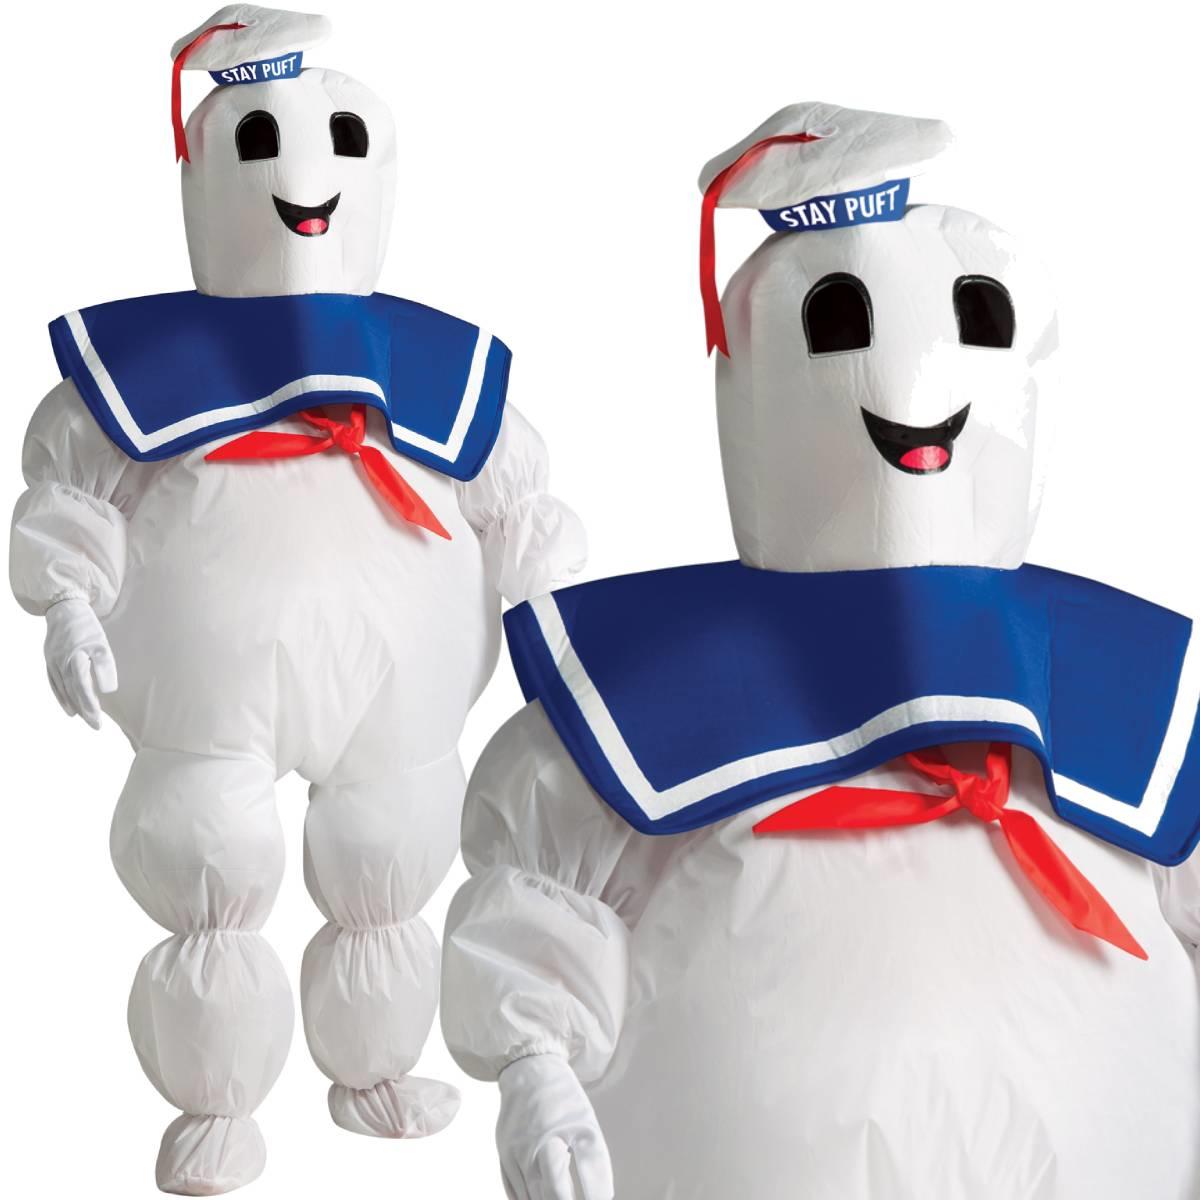 Ghostbusters Stay Puft Inflatable Fancy Dress Costume for Children by Rubies 884331 available here at Karnival Costumes online party shop